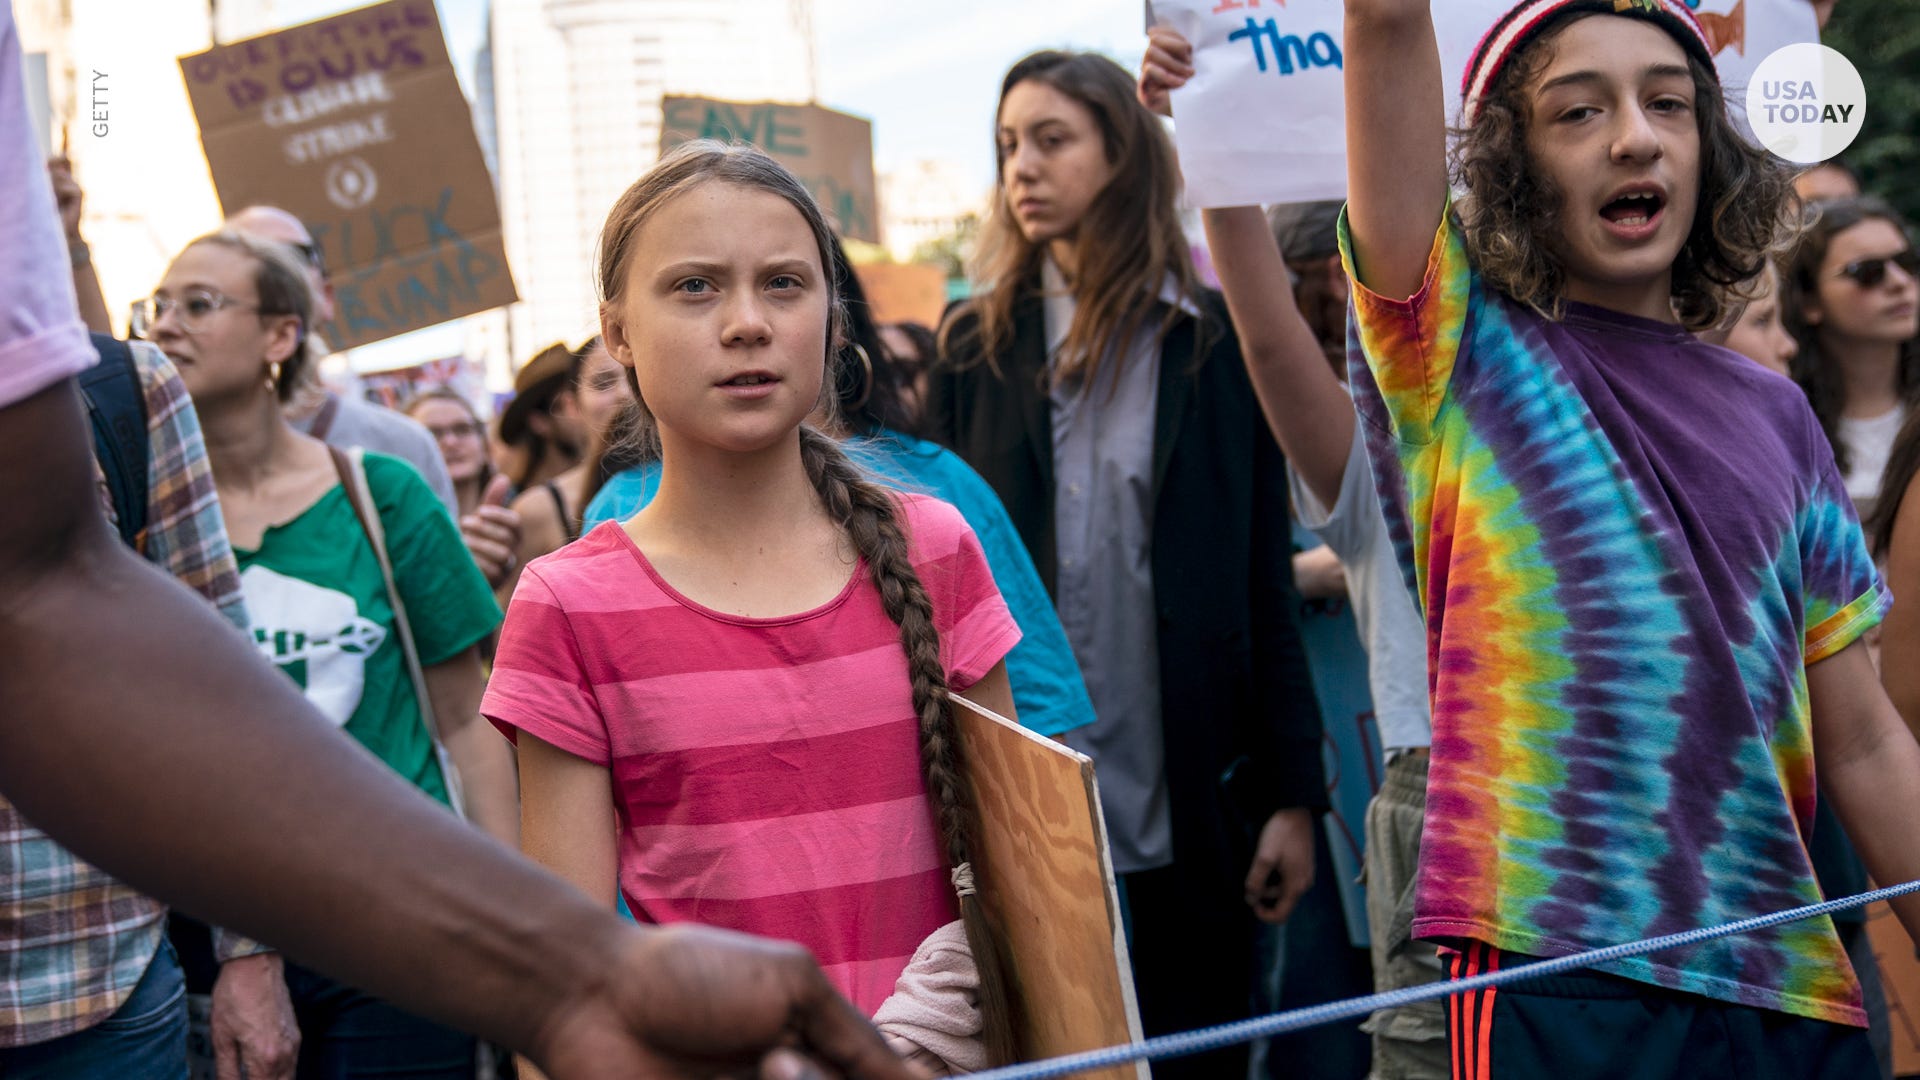 Fox News apologizes after guest calls Greta Thunberg 'mentally ill'1920 x 1080